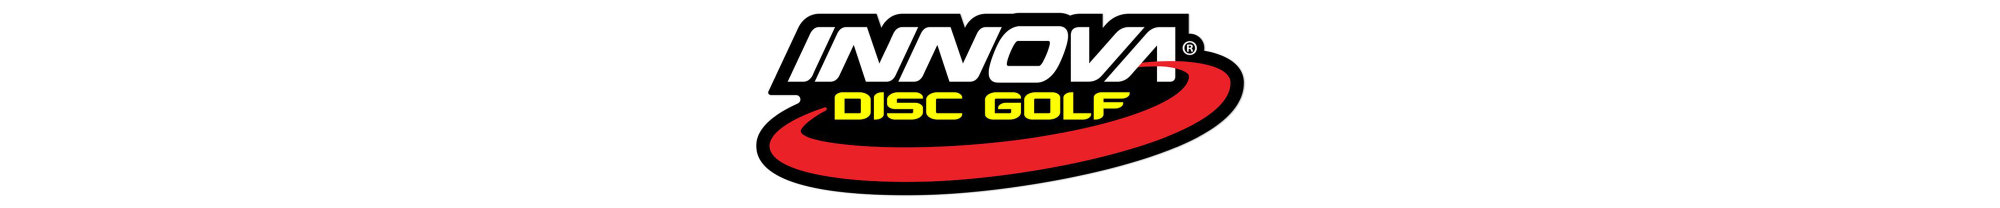 Innova Putter - Select to View Color Options